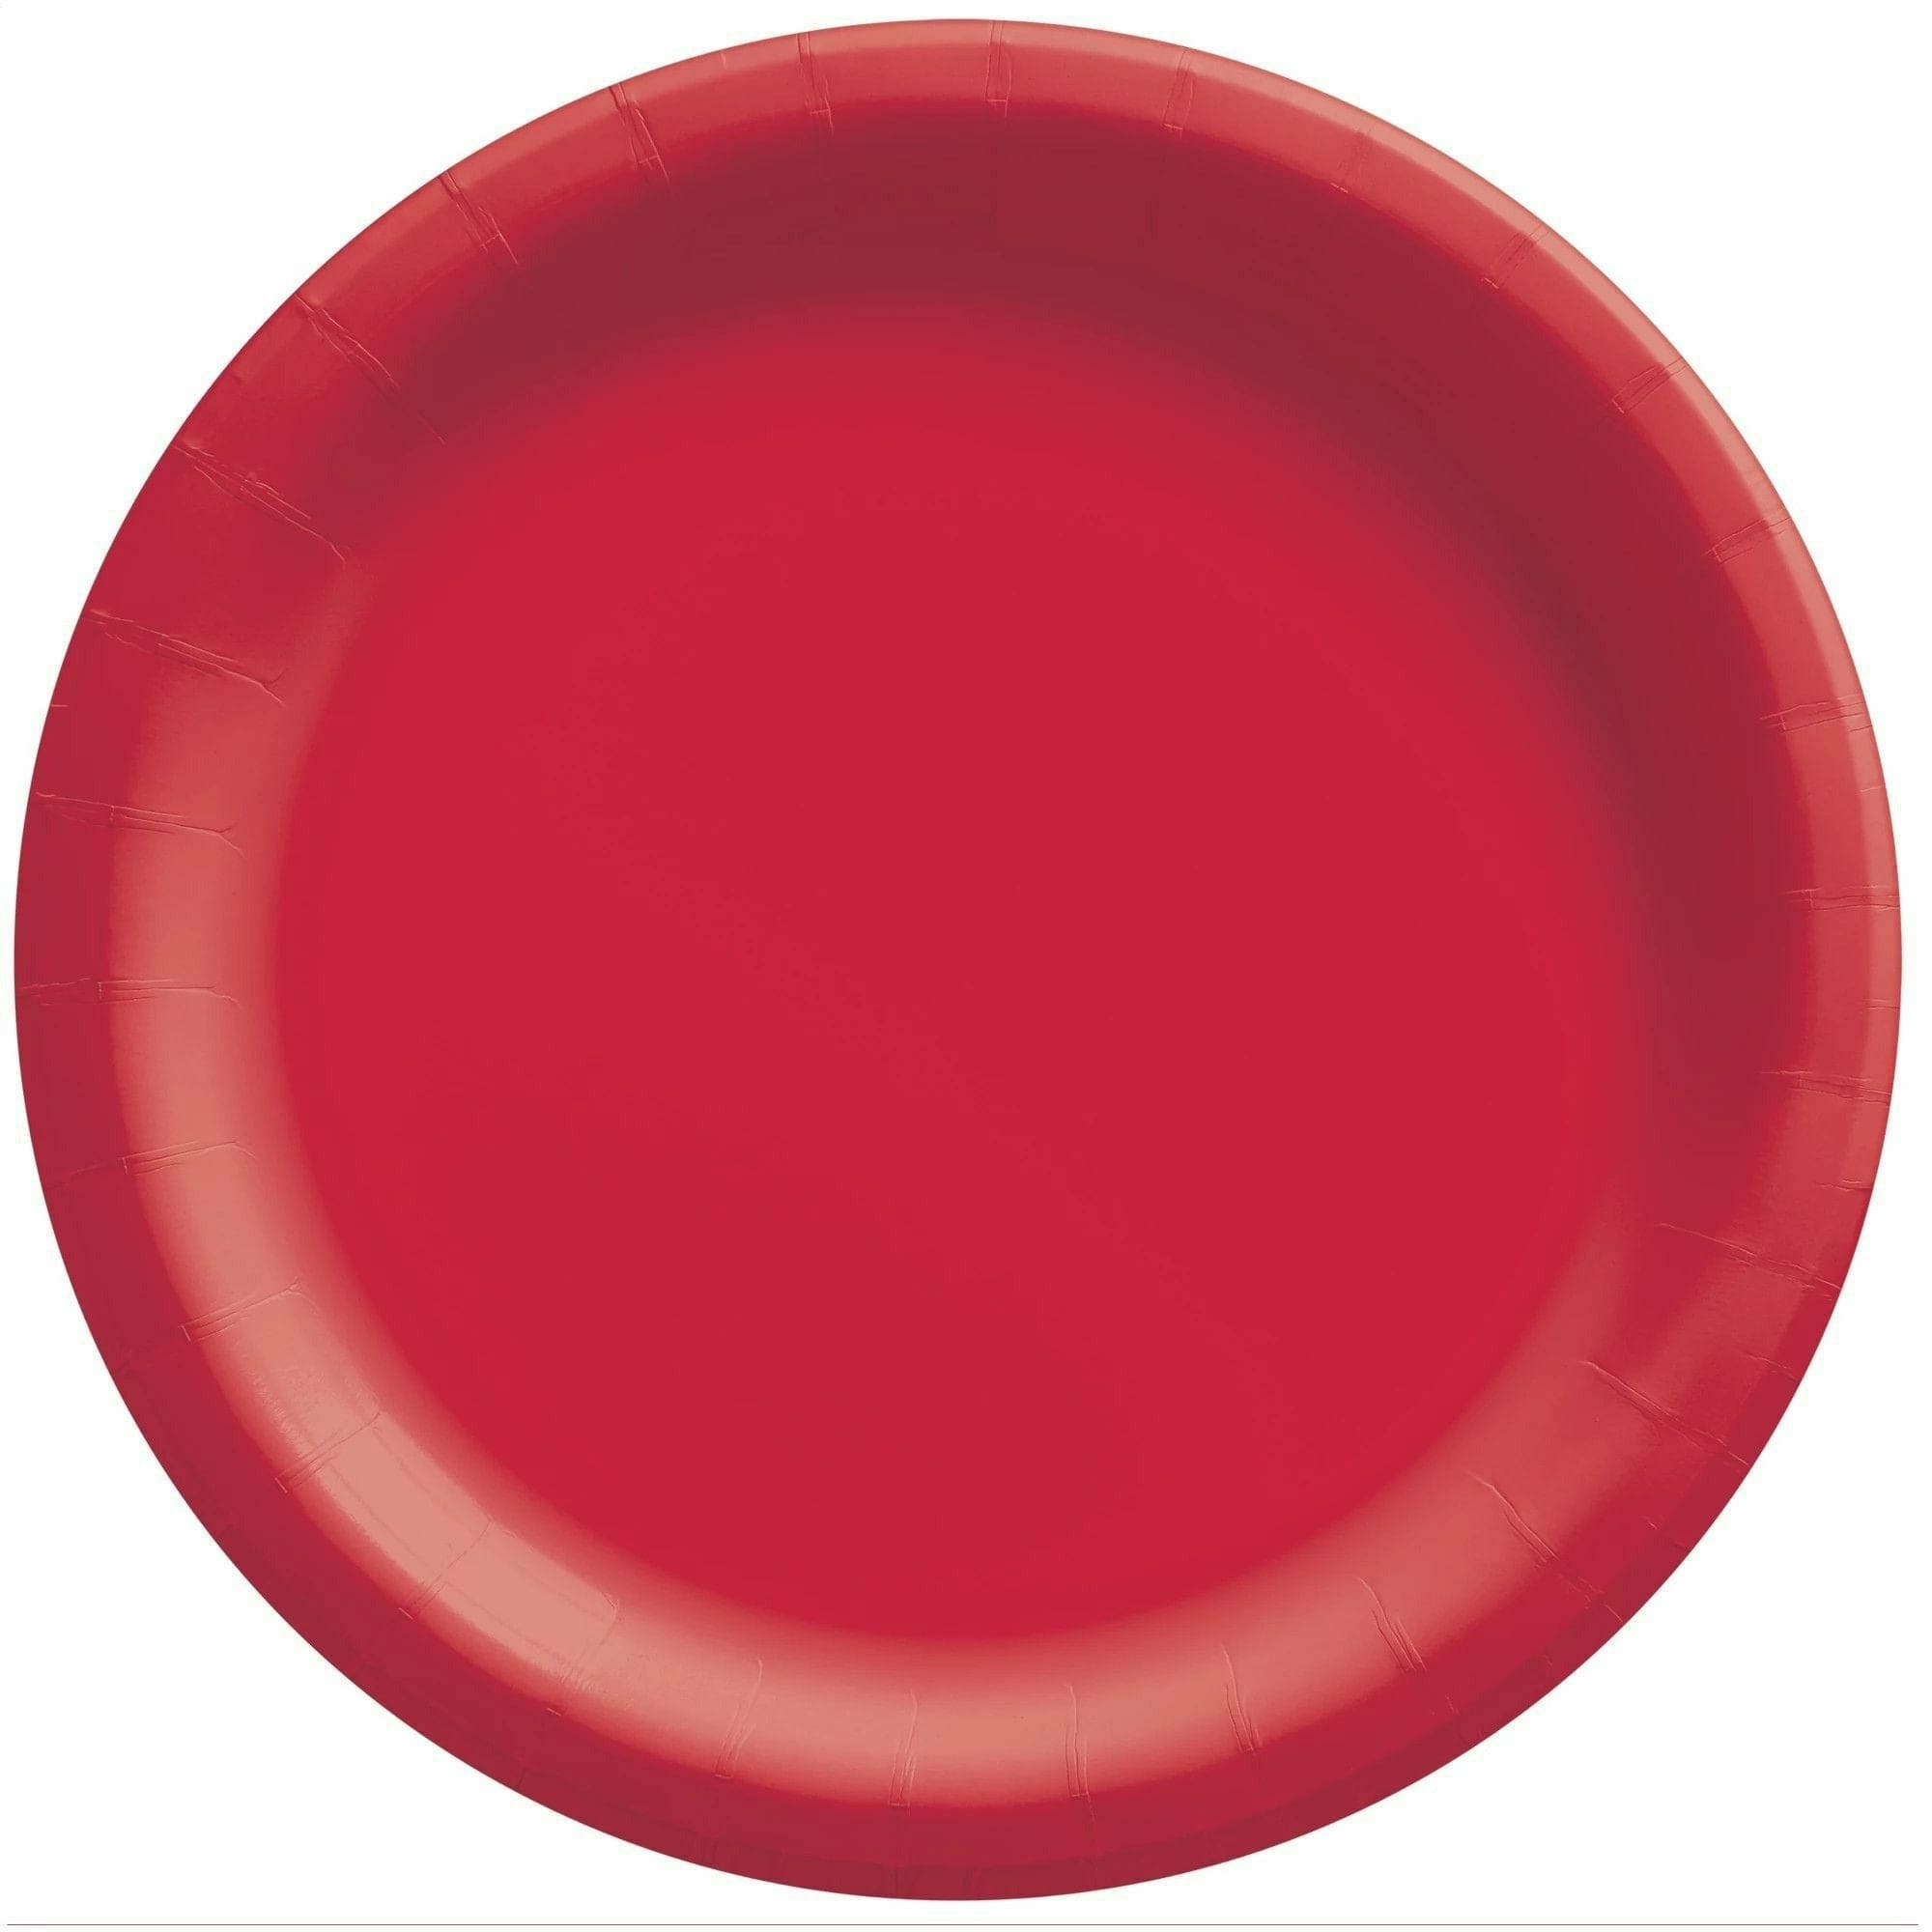 Amscan BASIC Apple Red - 10" Round Paper Plates, 50 Ct.